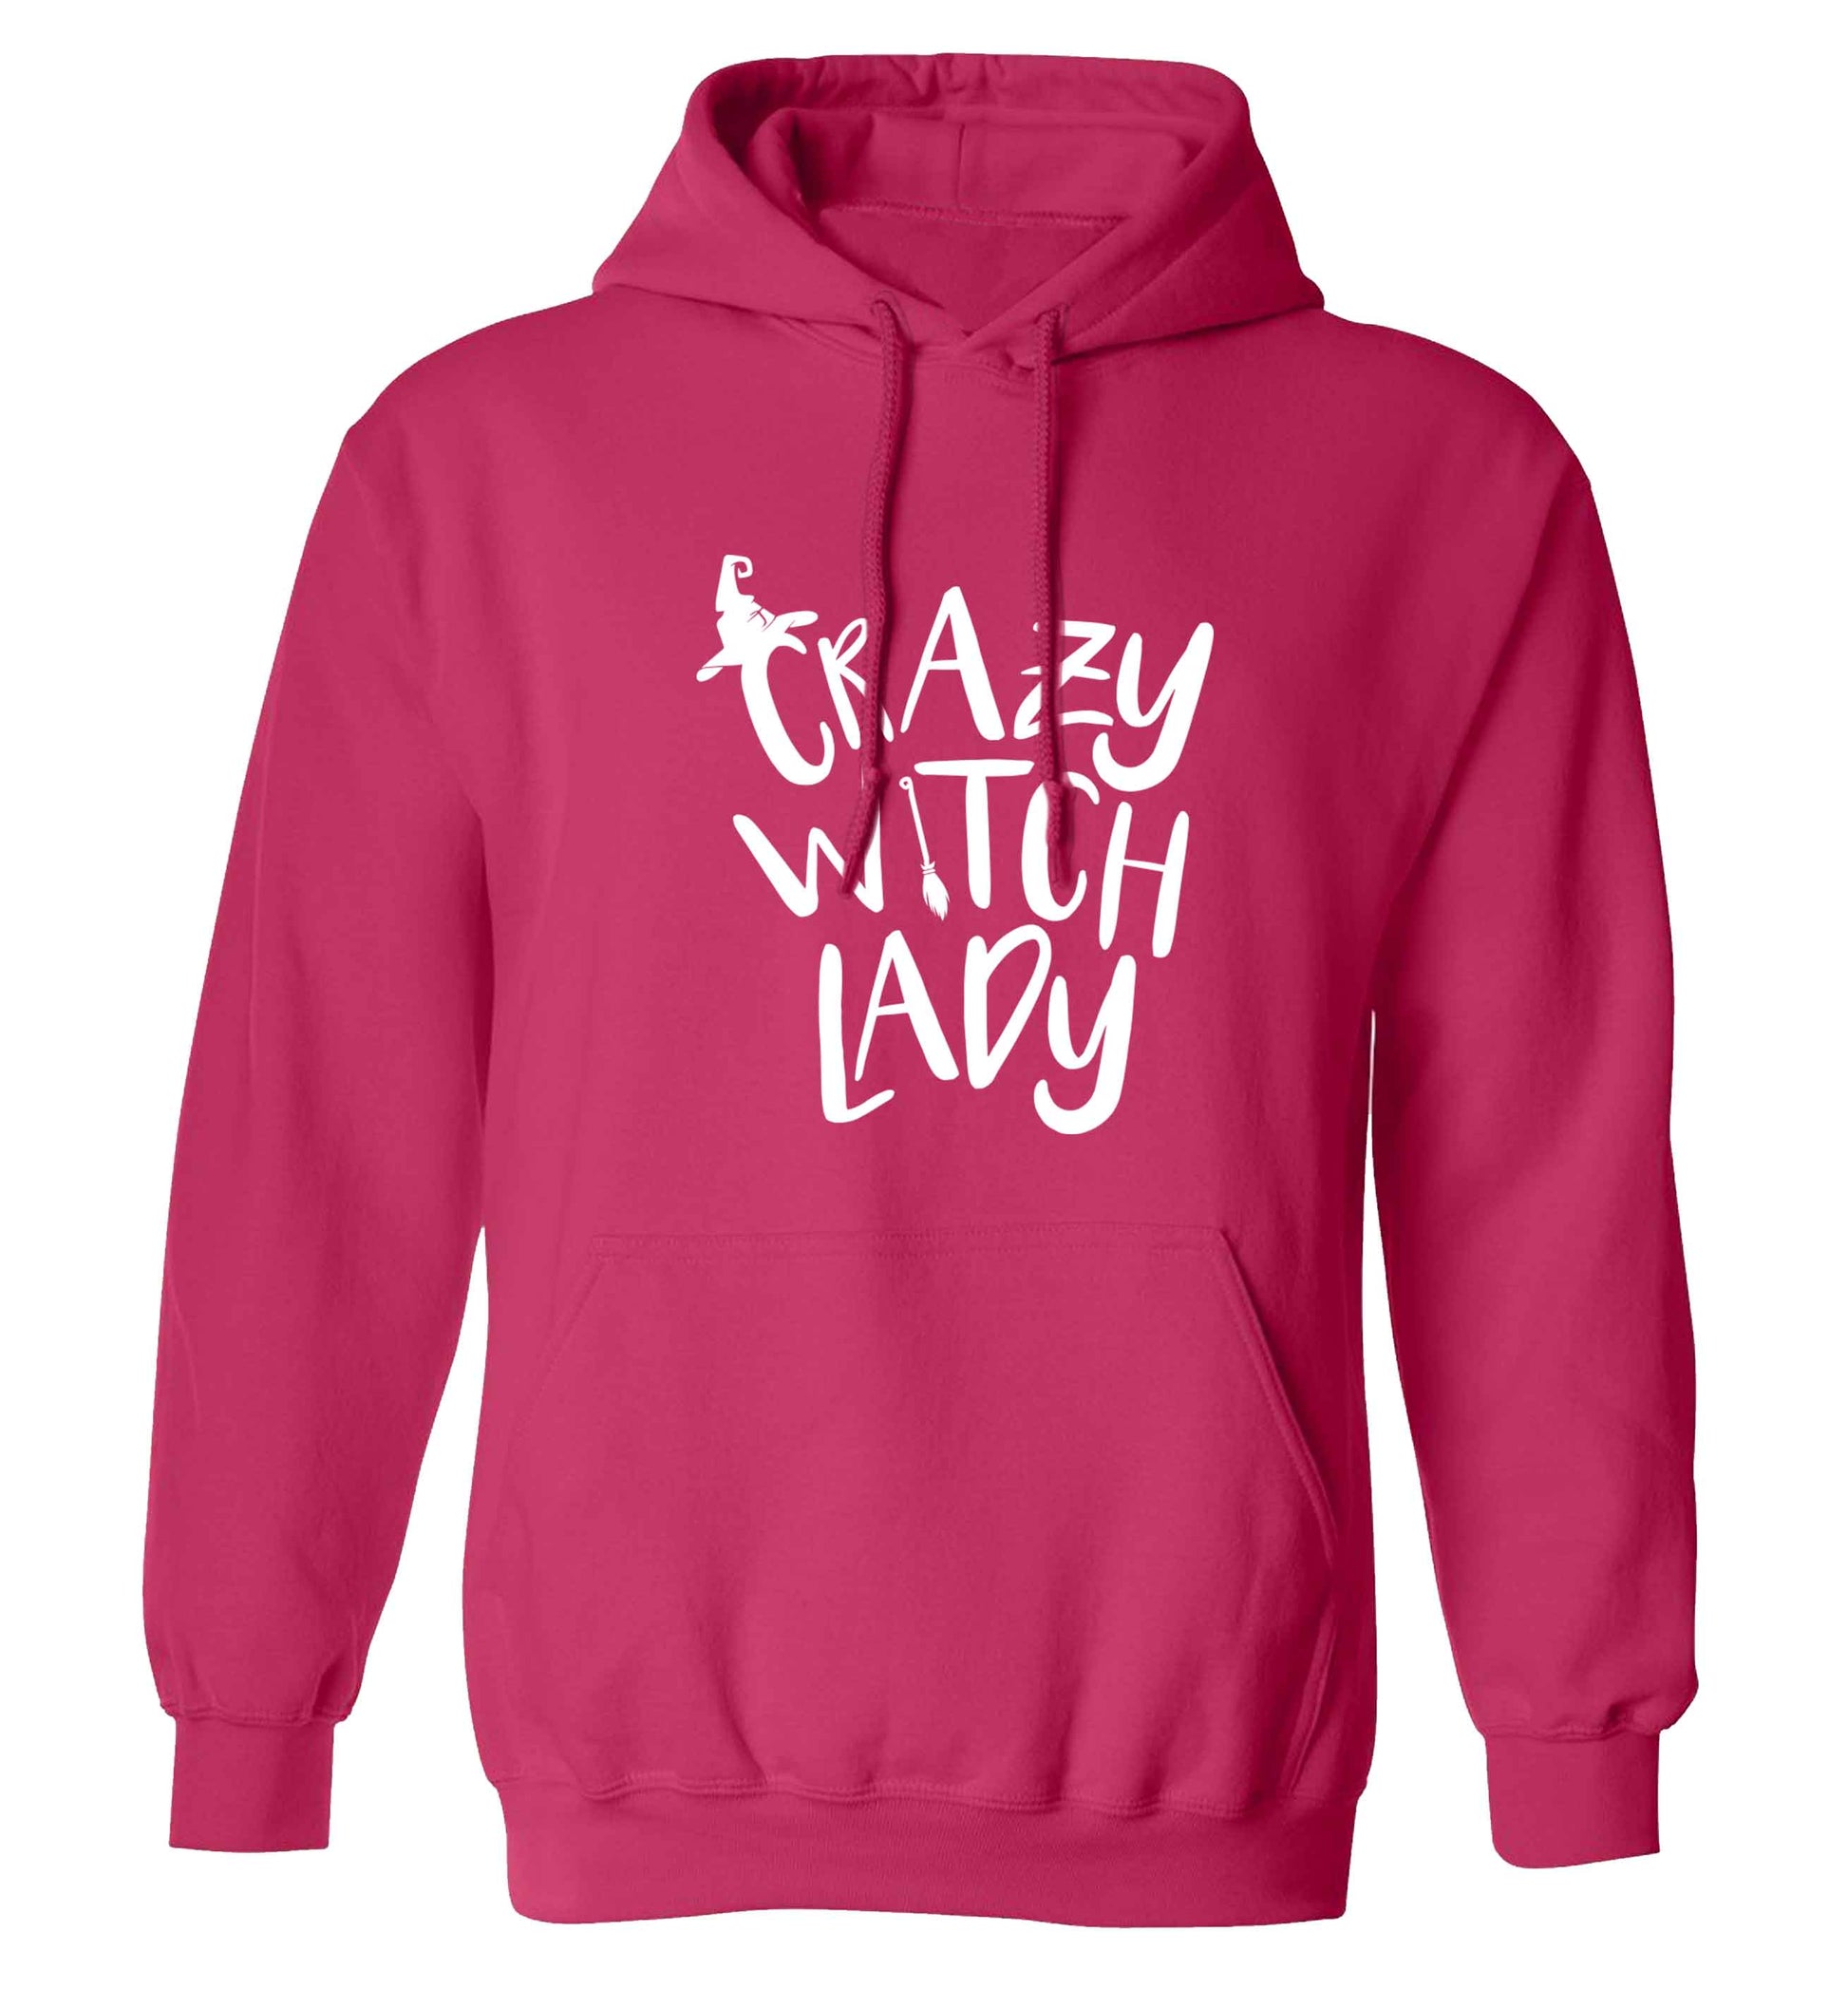 Crazy witch lady adults unisex pink hoodie 2XL